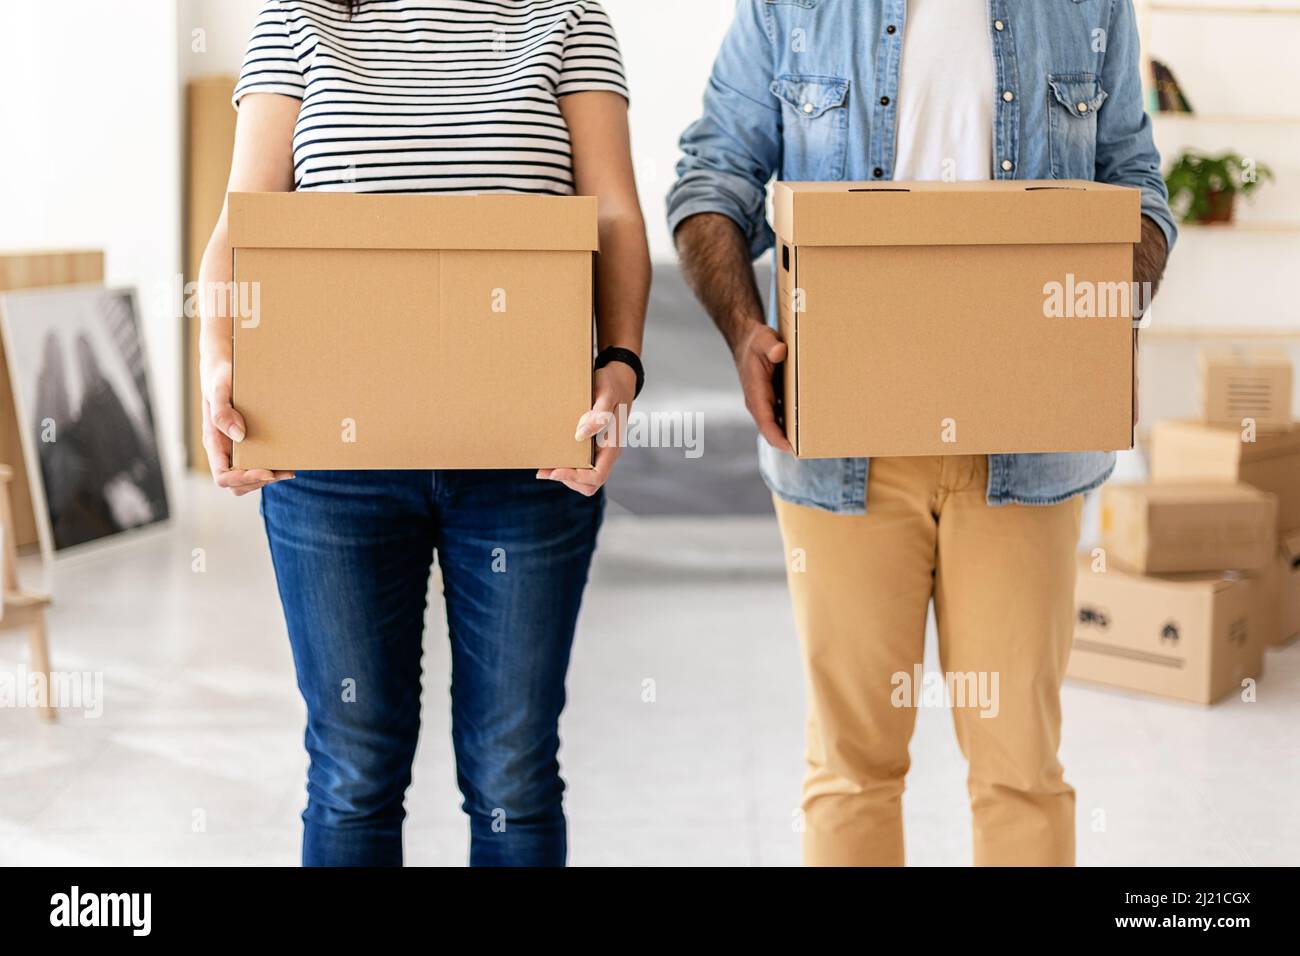 Young couple carrying cardboard boxes at new home before unpacking Stock Photo